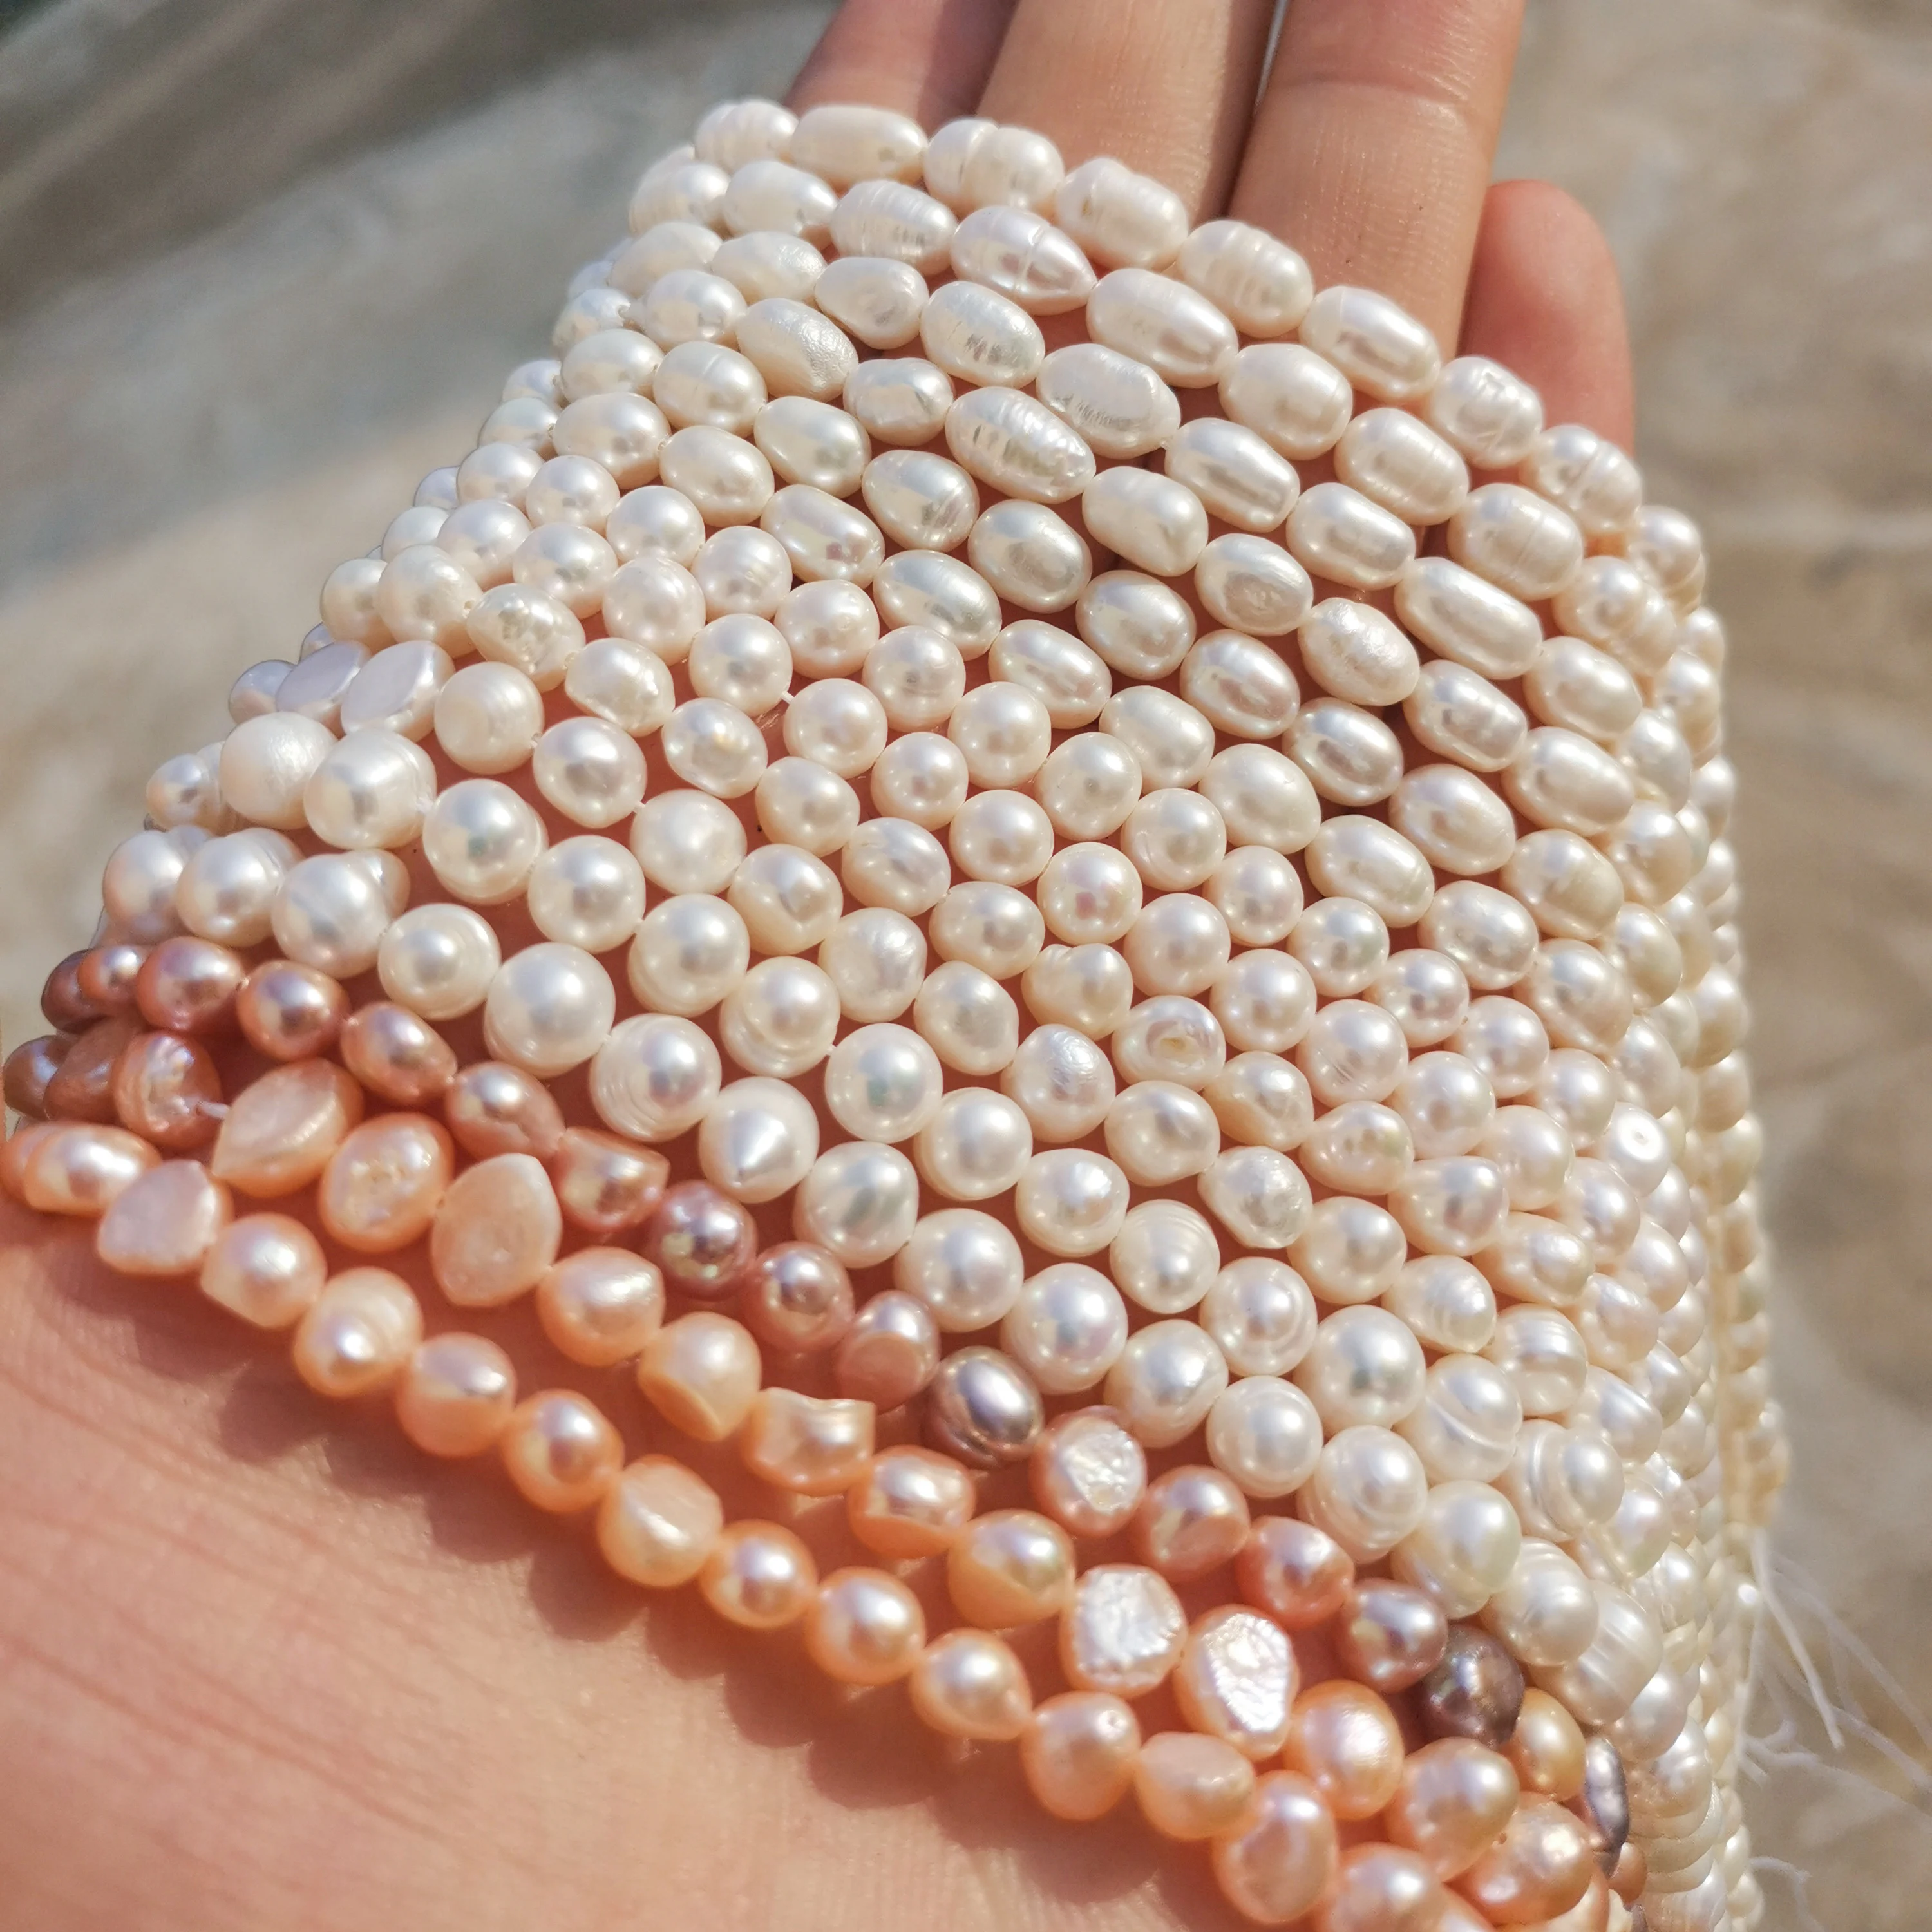 2 Strands Freshwater Pearl Beads Natural Genuine Freshwater Cultured Pearl Irregular Pearl Beads Freshwater Pearl Beads for Jewelry Making (7-8 mm 8-9